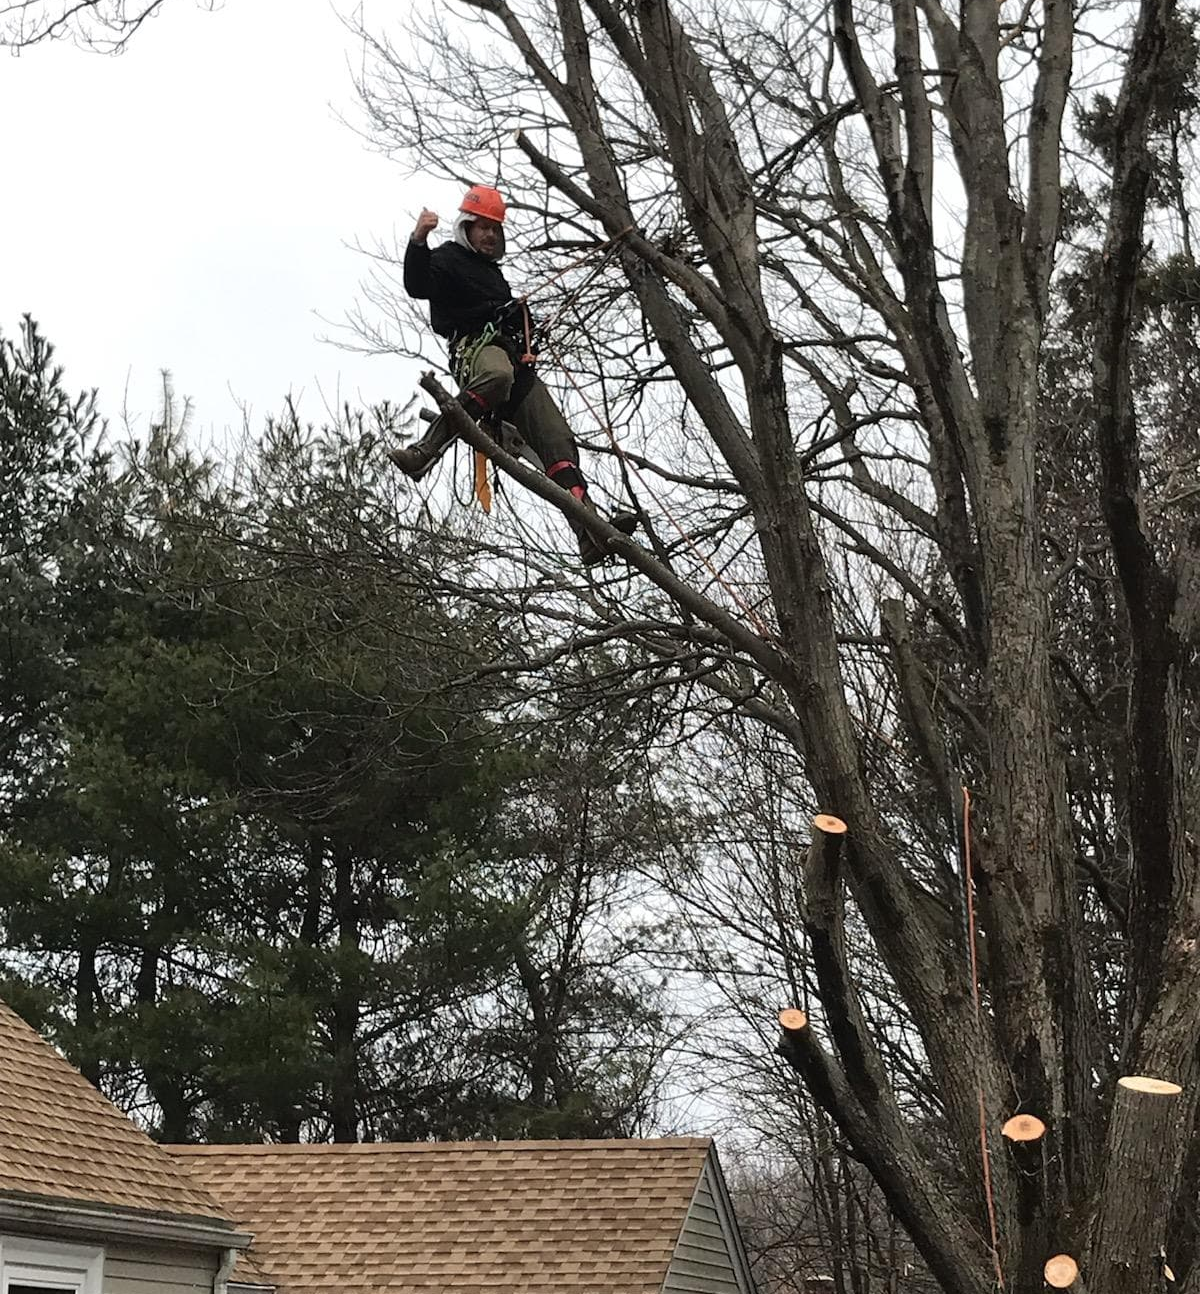 A tree service expert carefully cuts down a tree in someone's yard while doing tree service in Taunton MA